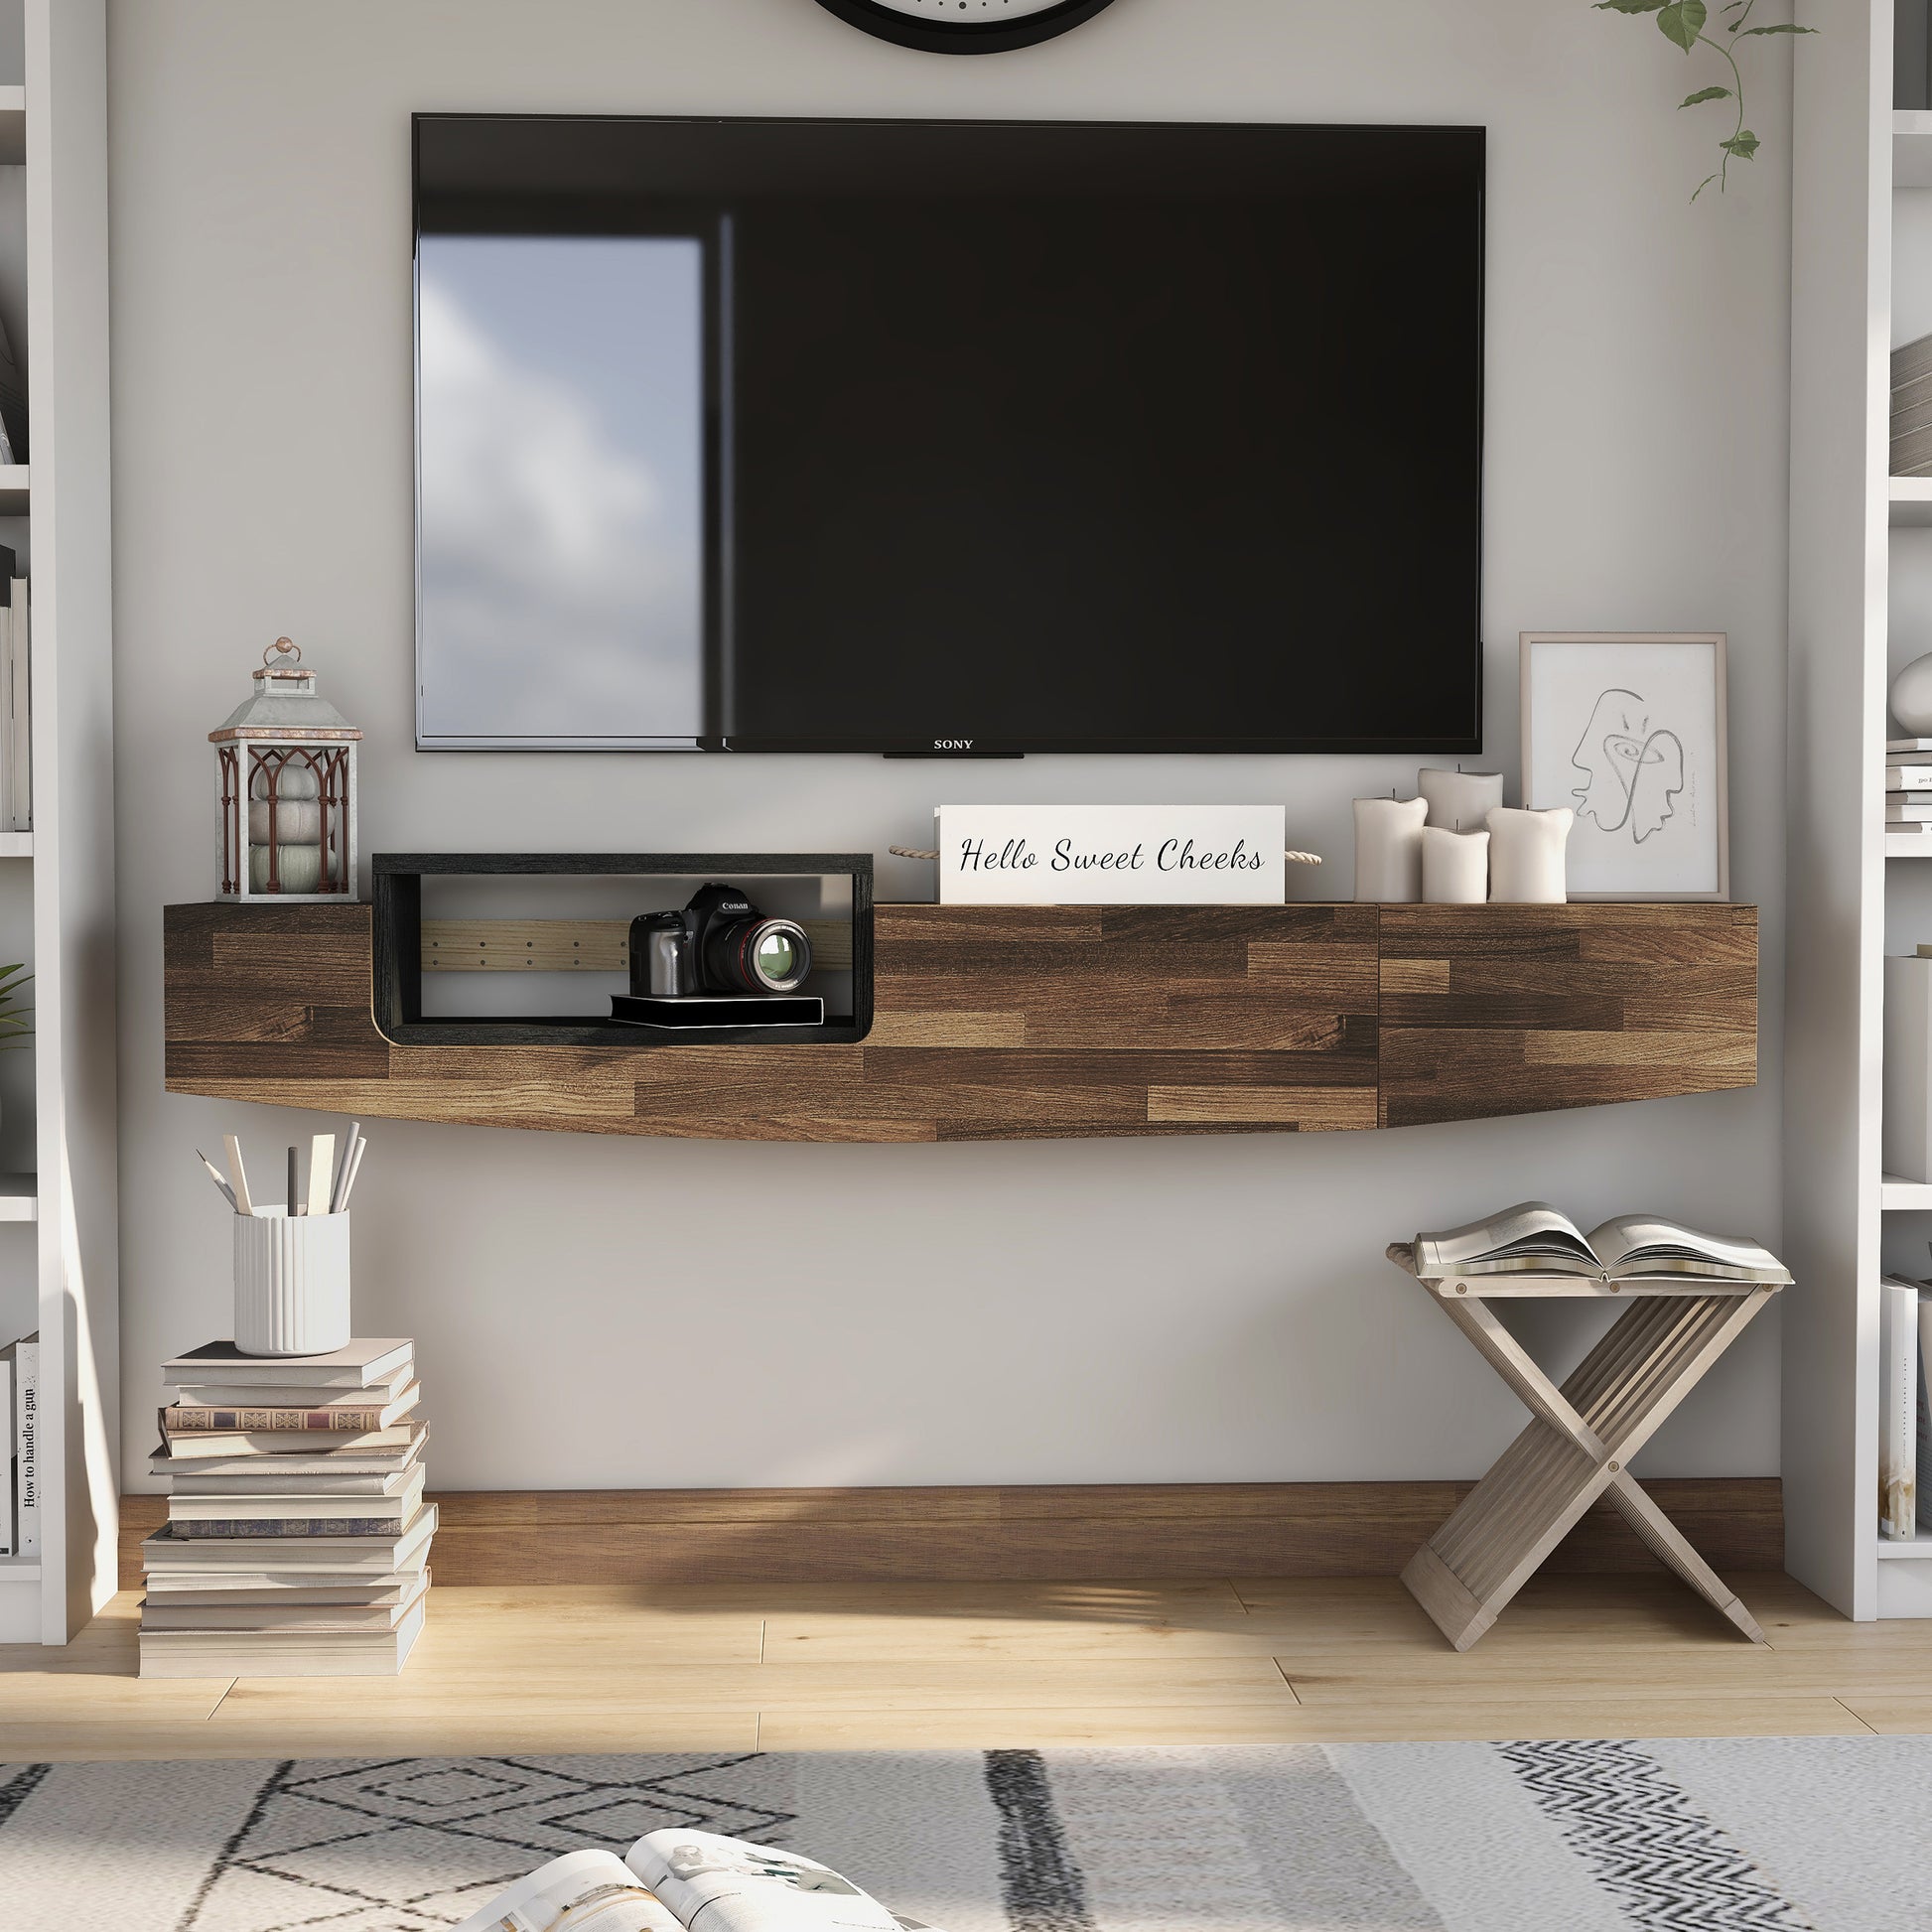 Front-facing farmhouse light hickory and black one-drawer lift-top floating TV console in a living room with accessories